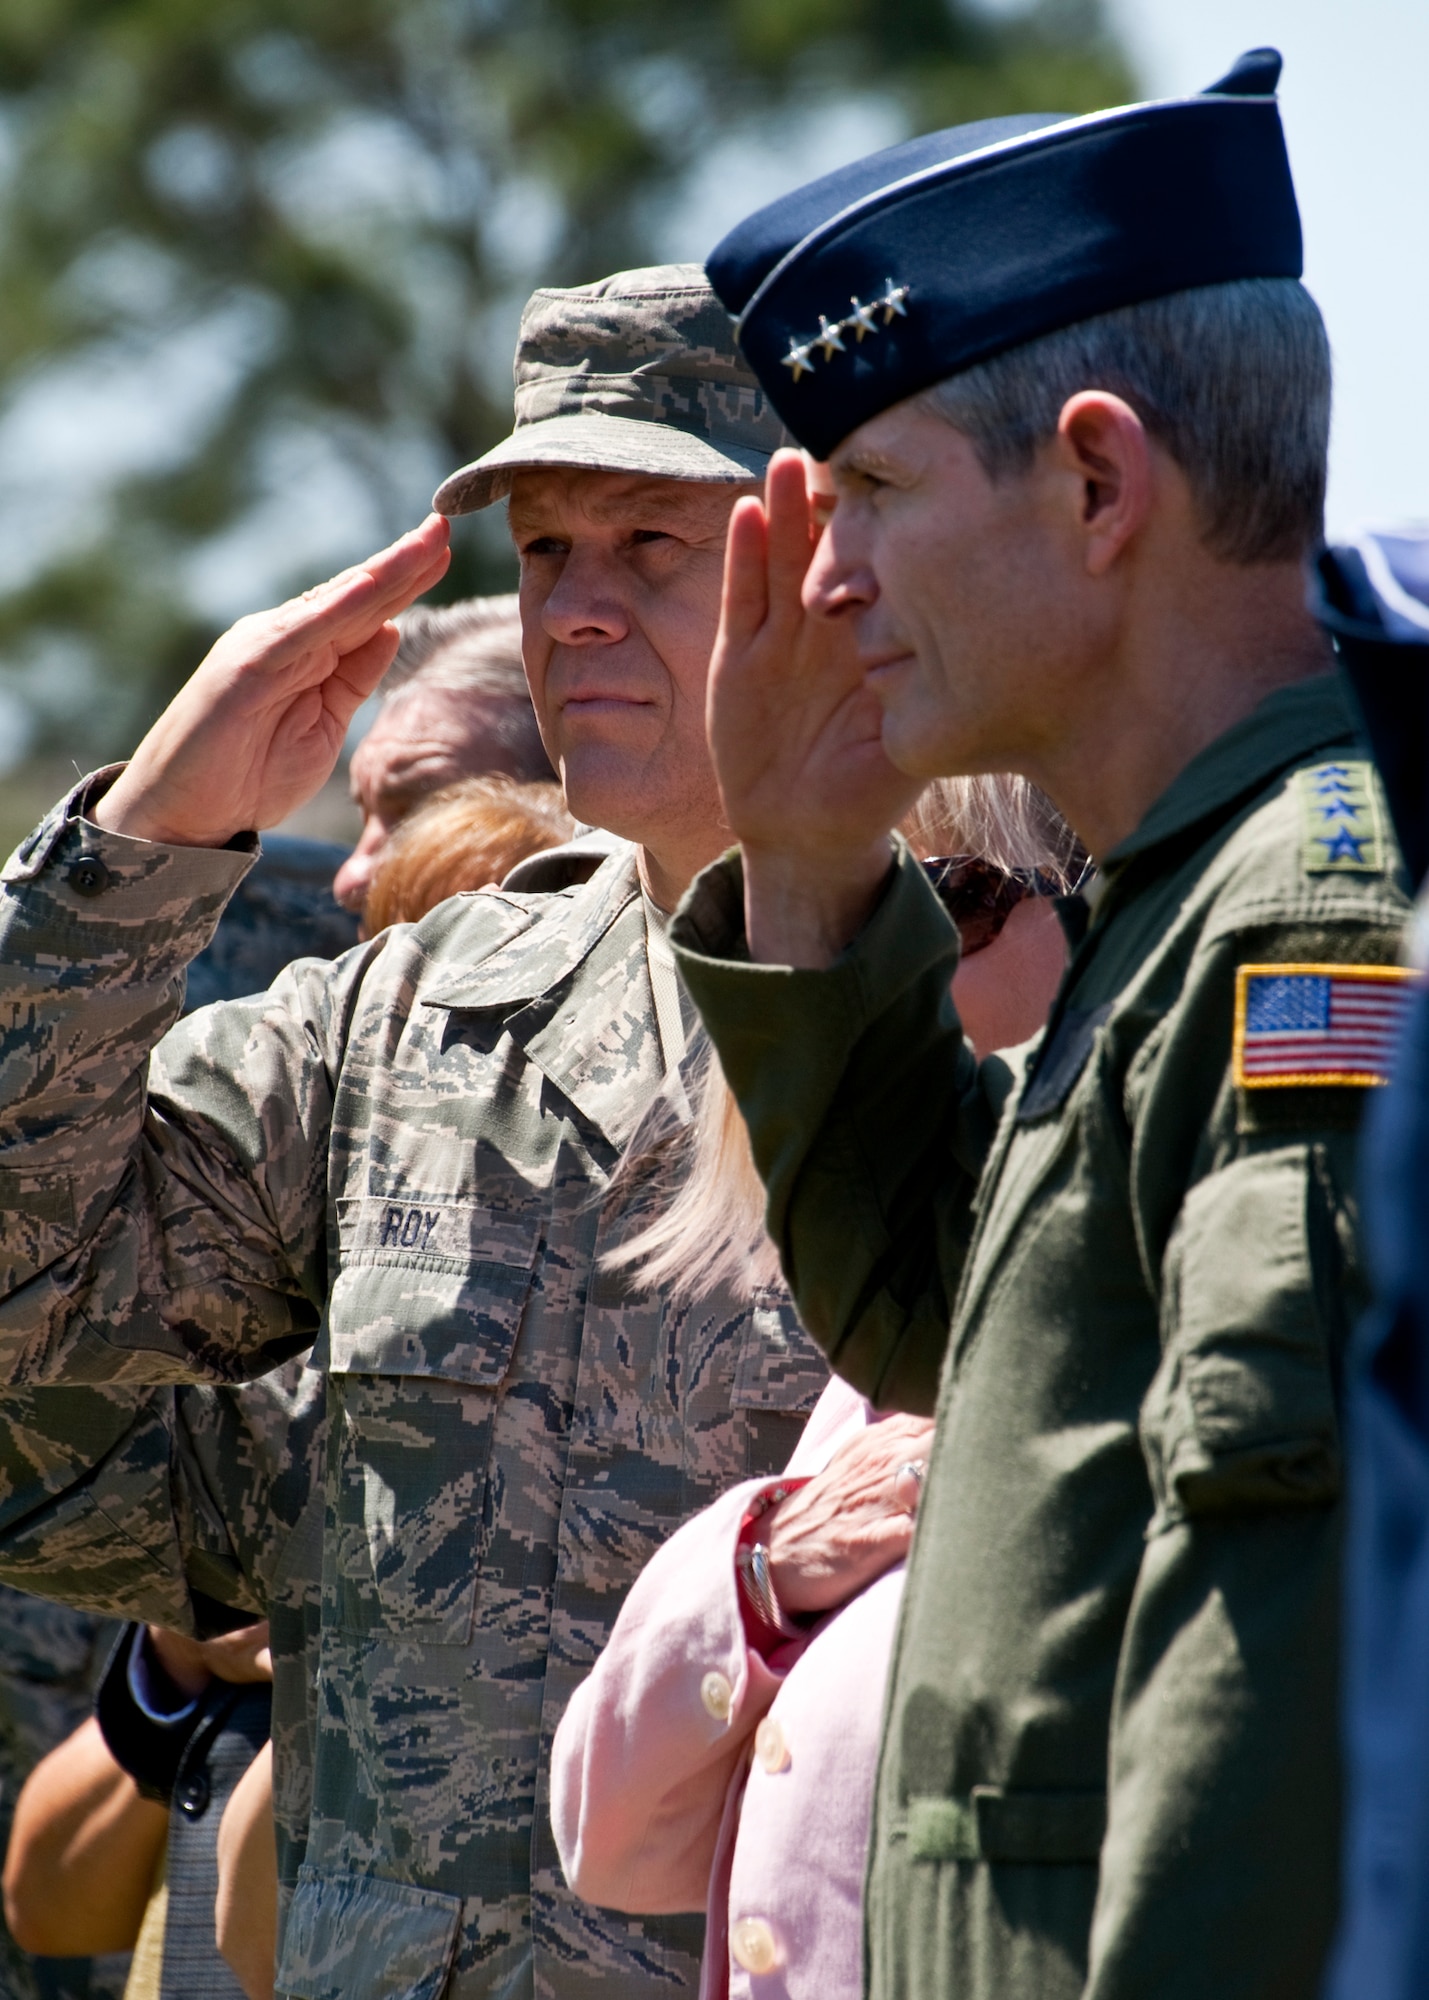 Air Force Chief of Staff Gen. Norton Schwartz and Chief Master Sgt. of the
Air Force James A. Roy salute the colors during the national anthem at an
MC-130E Combat Talon dedication ceremony at Hurlburt Field, Fla., May 6, 2011.  Chief Roy and General Schwartz, a former wing commander and Talon pilot at Hurlburt Field, saw the aircraft honored in its final resting place -- the base's airpark.  The Talon, known as "Wild Thing" around the 919th Special Operations Wing, made its final flight May 7, 2010, completing 21,336.5 hours of flight. (U.S. Air Force photo/Tech. Sgt. Samuel King Jr.)
